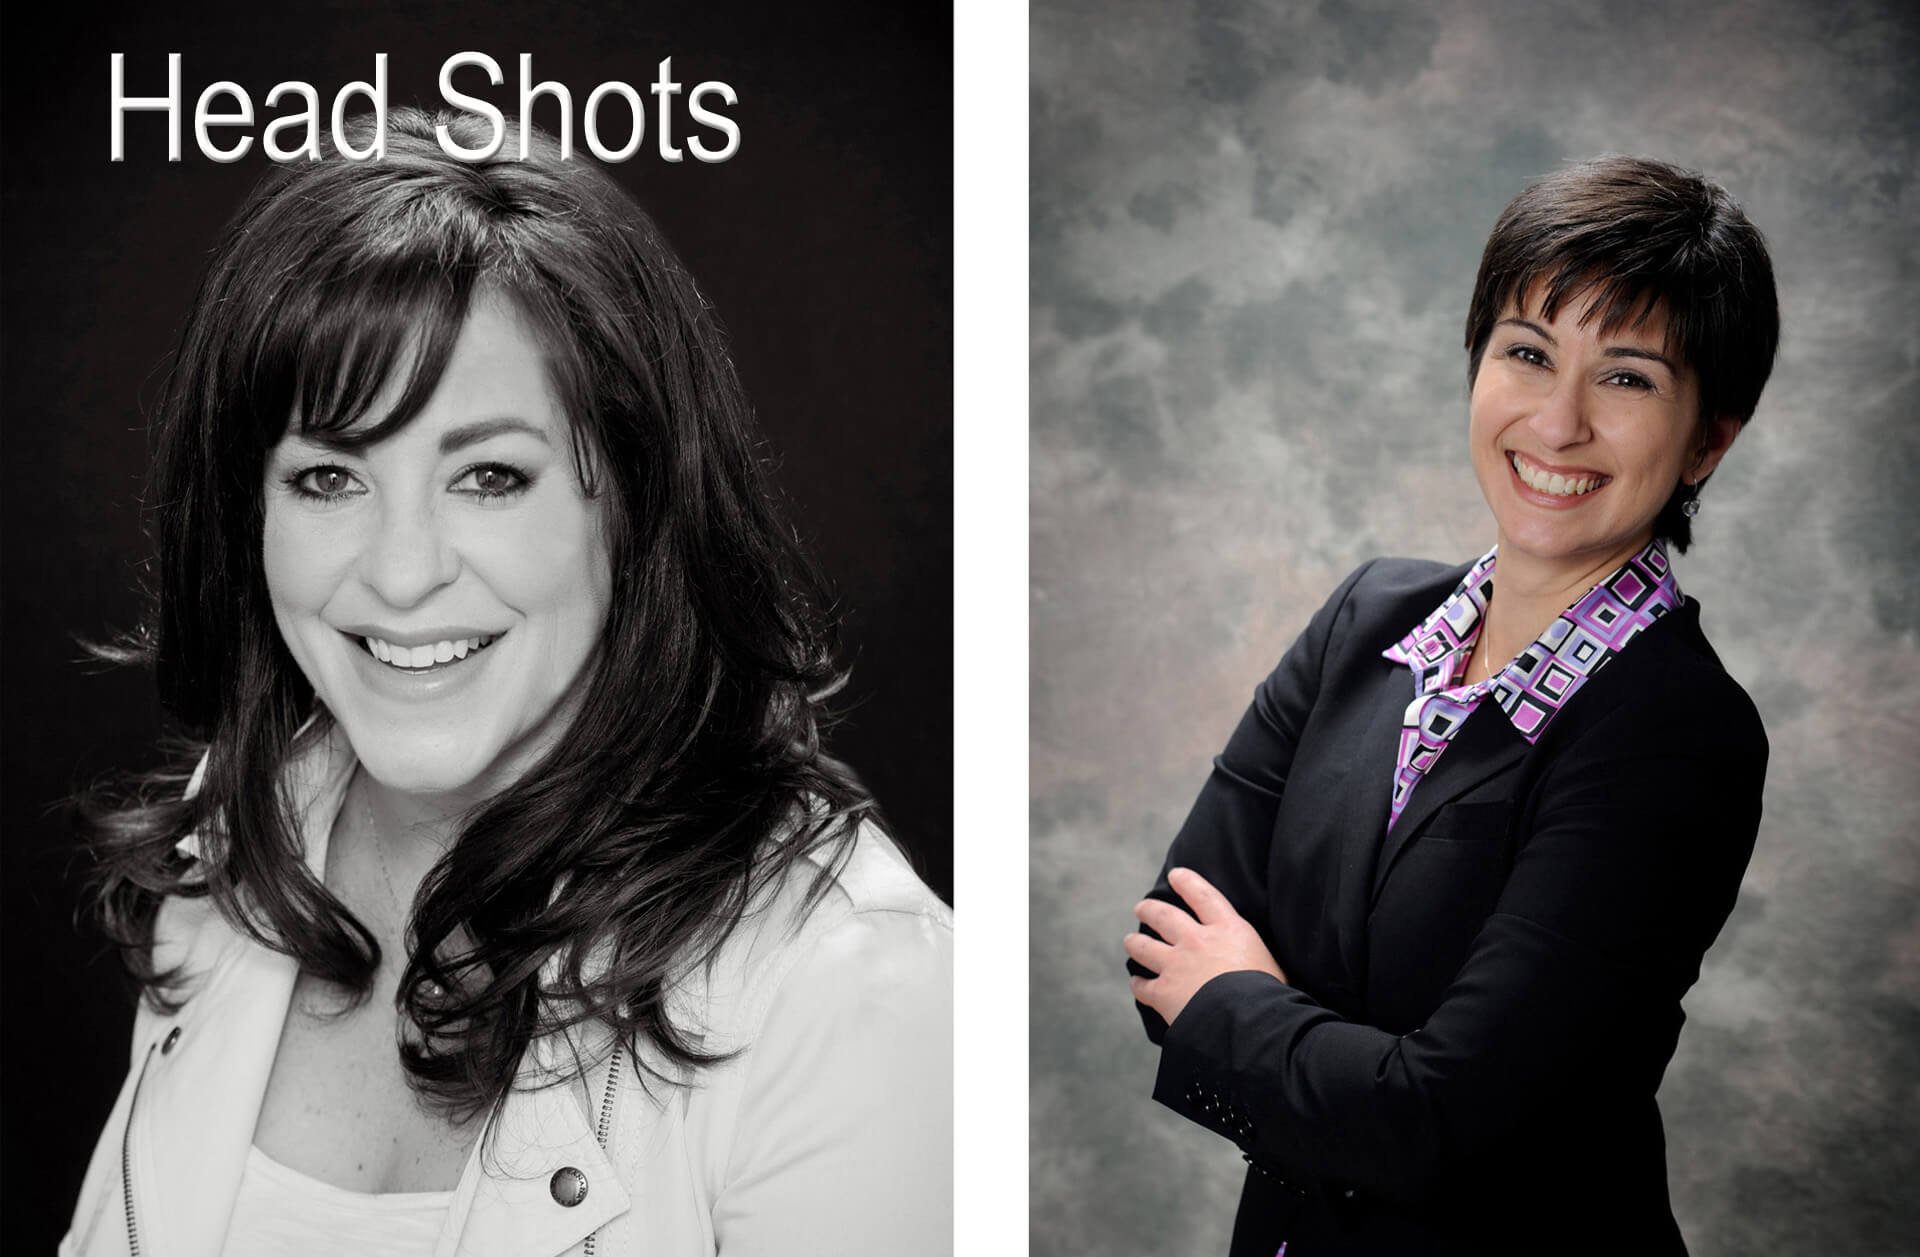 Clean, classic head shot photography located in Troy Michigan for professionals looking to update their linked in and Facebook photos.